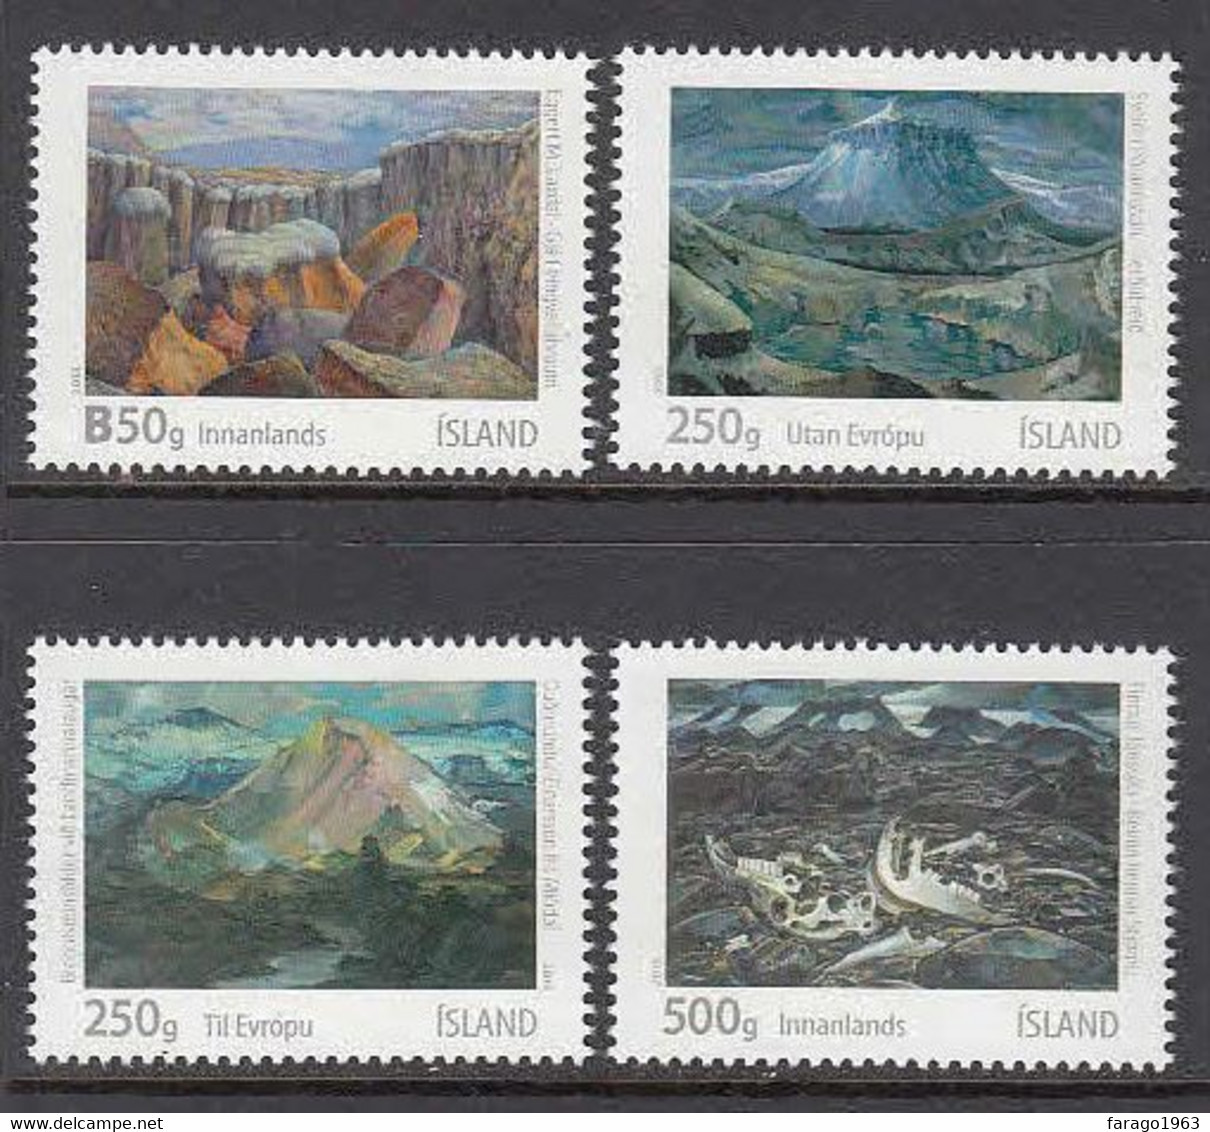 2013 Iceland Paintings Complete Set Of 4 MNH @ BELOW FACE VALUE - Unused Stamps